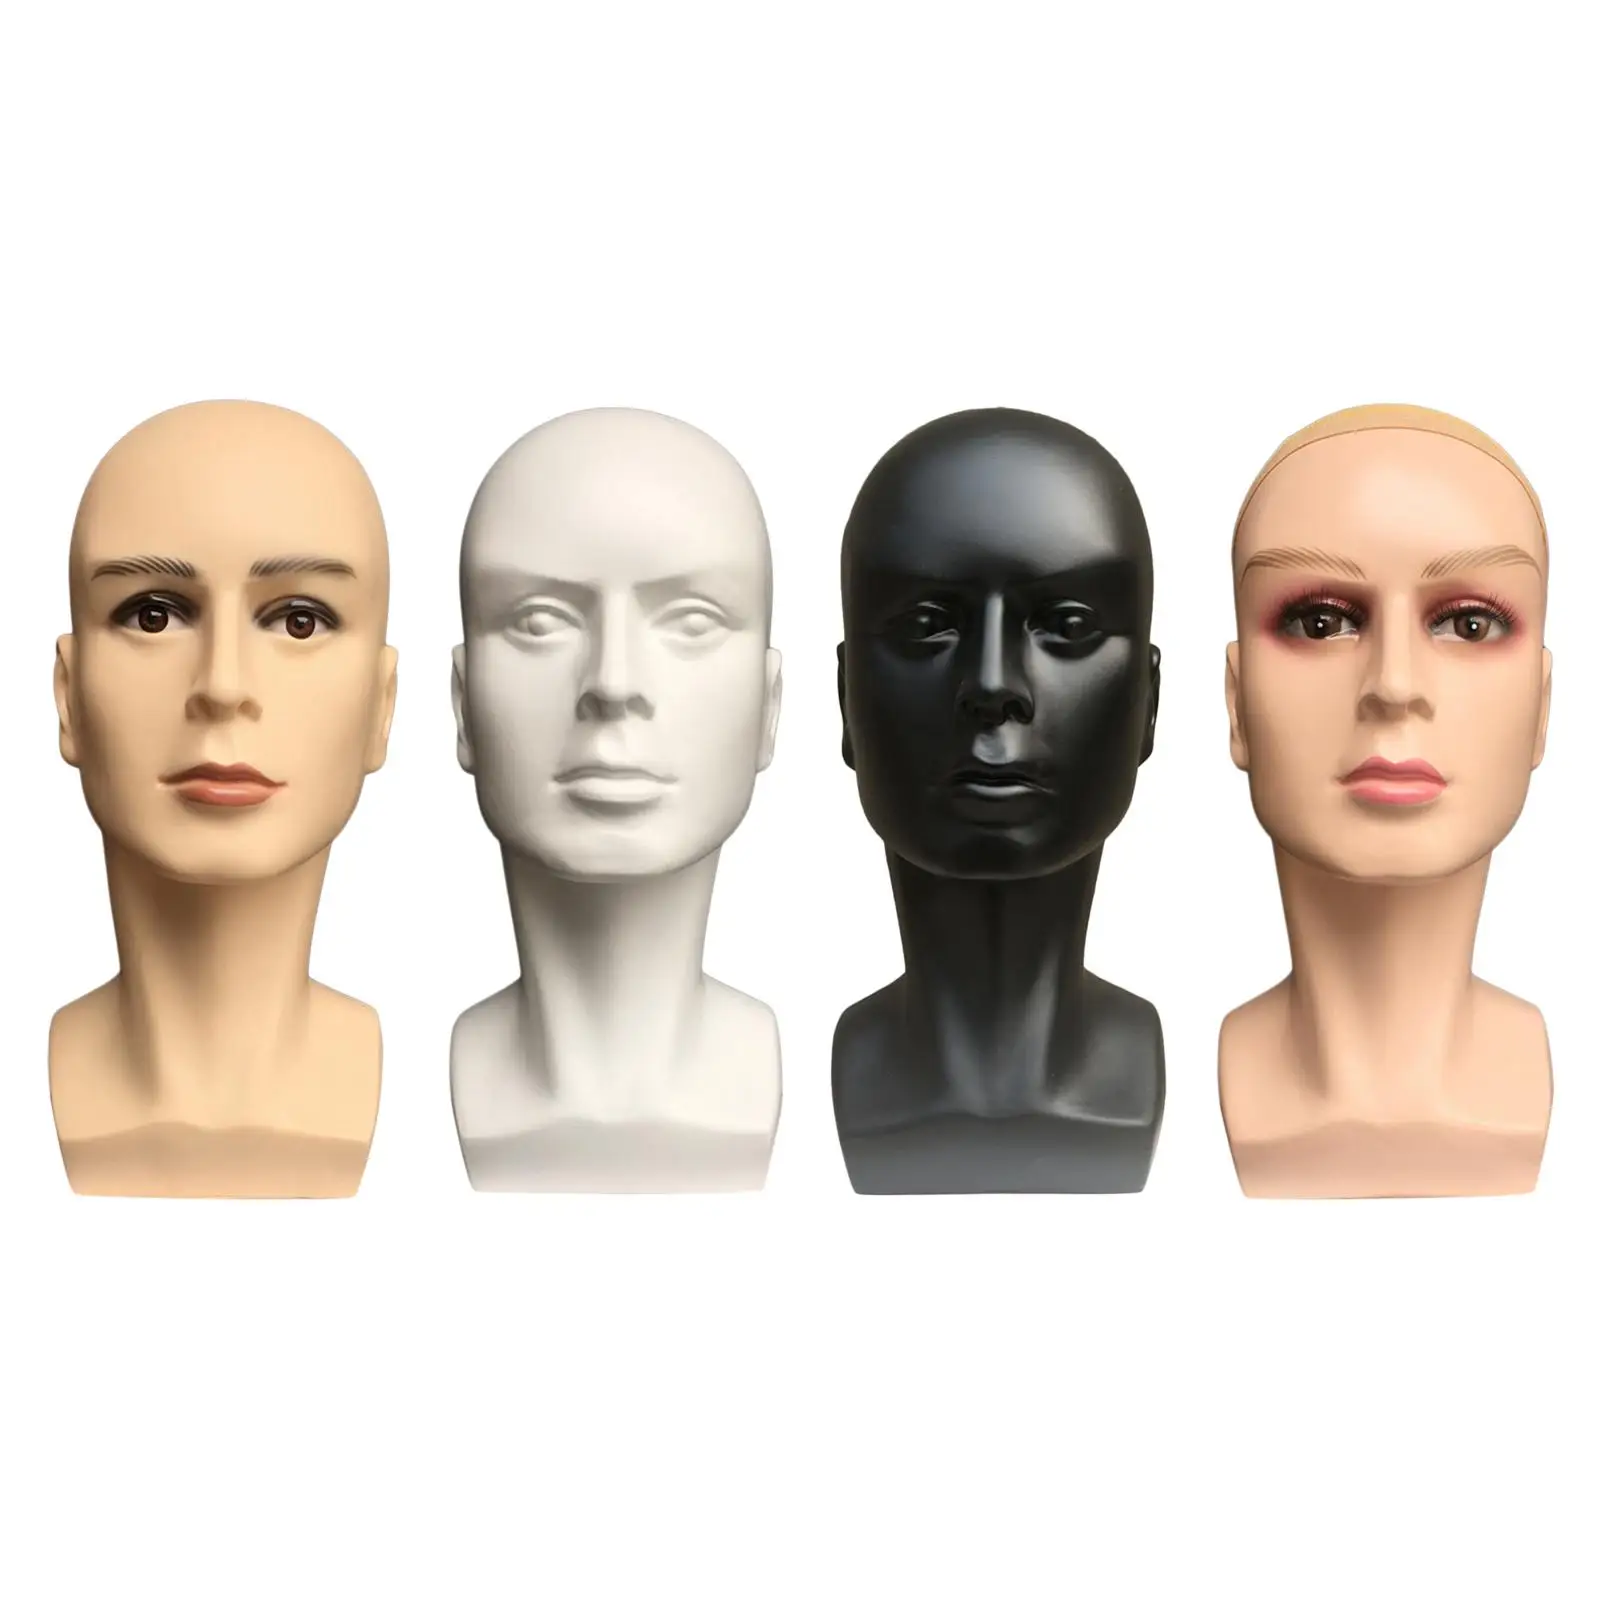 Male Wig Head Mannequin Durable Manikin Wig Head Stand Wig Display Model for Wigs Making Styling Glasses Hairpieces Hats Jewelry